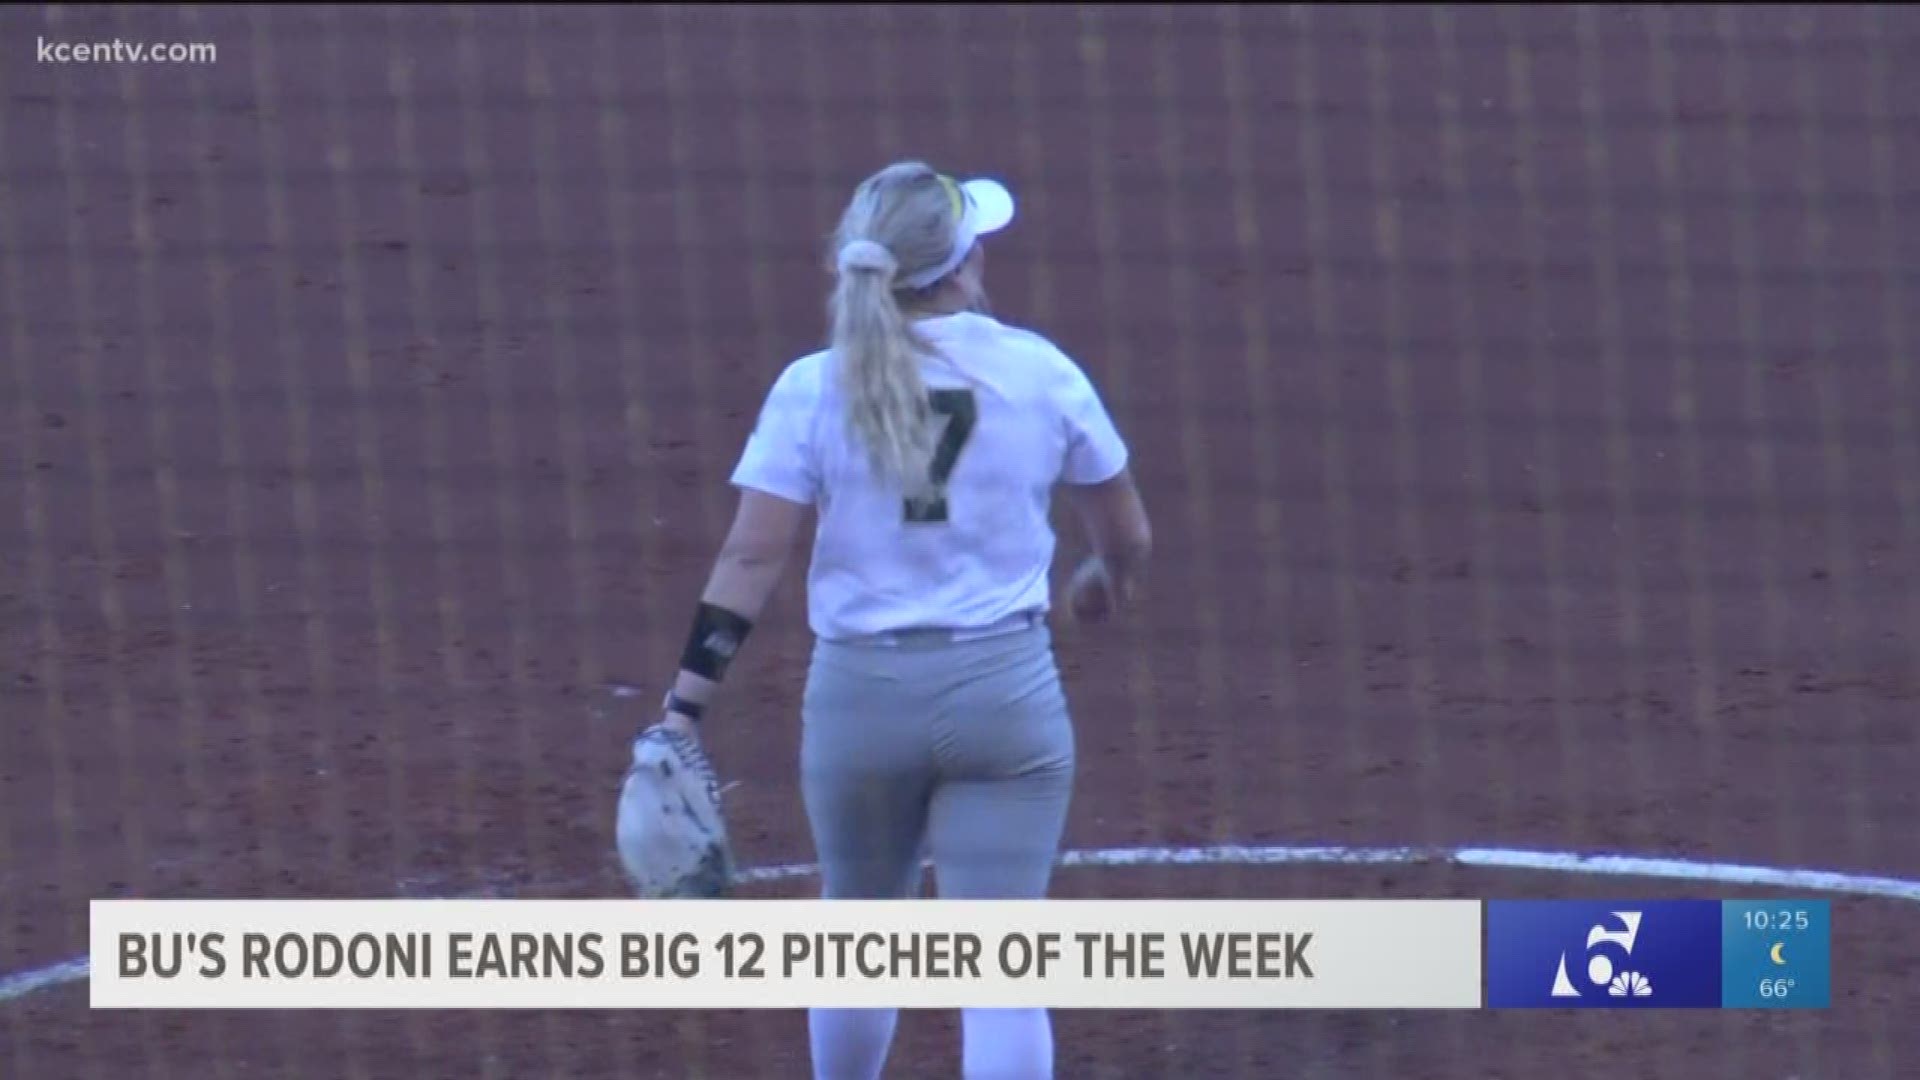 Baylor's Gia Rodoni was named Big 12 Pitcher of the week for the 5th time this season setting a brand new Baylor record. 